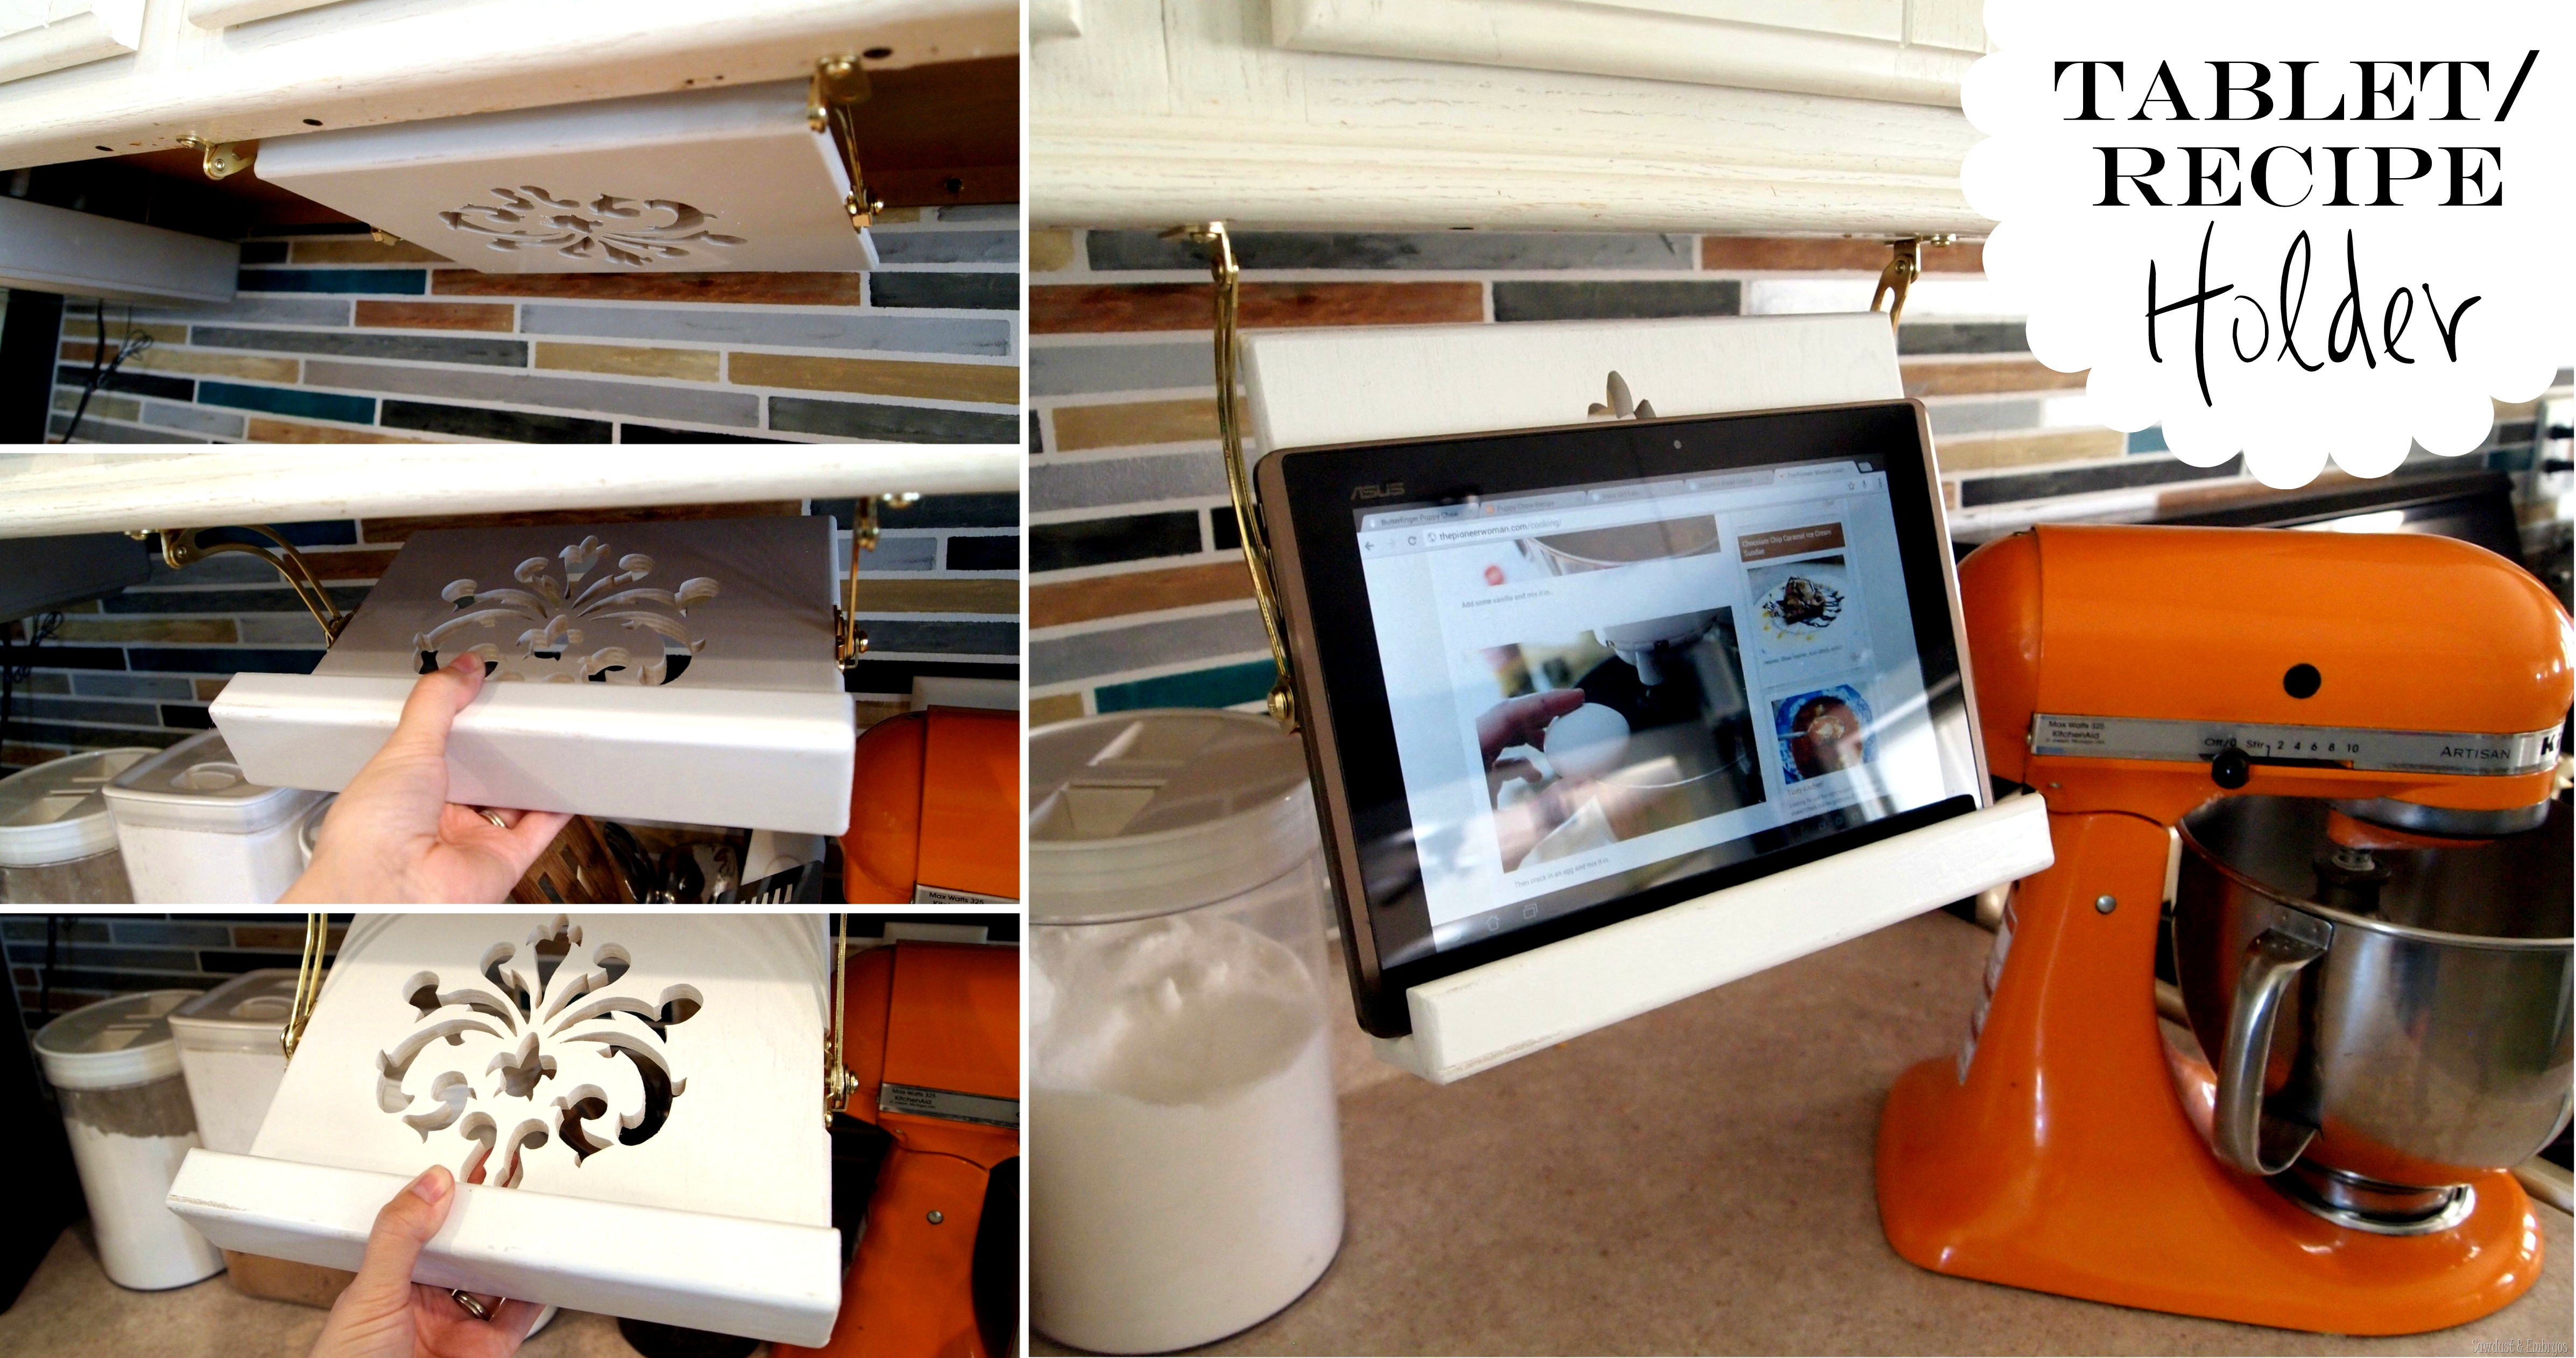 Best ideas about DIY Tablet Holder
. Save or Pin DIY Tablet and Recipe Book Holder for Under Cabinets Now.